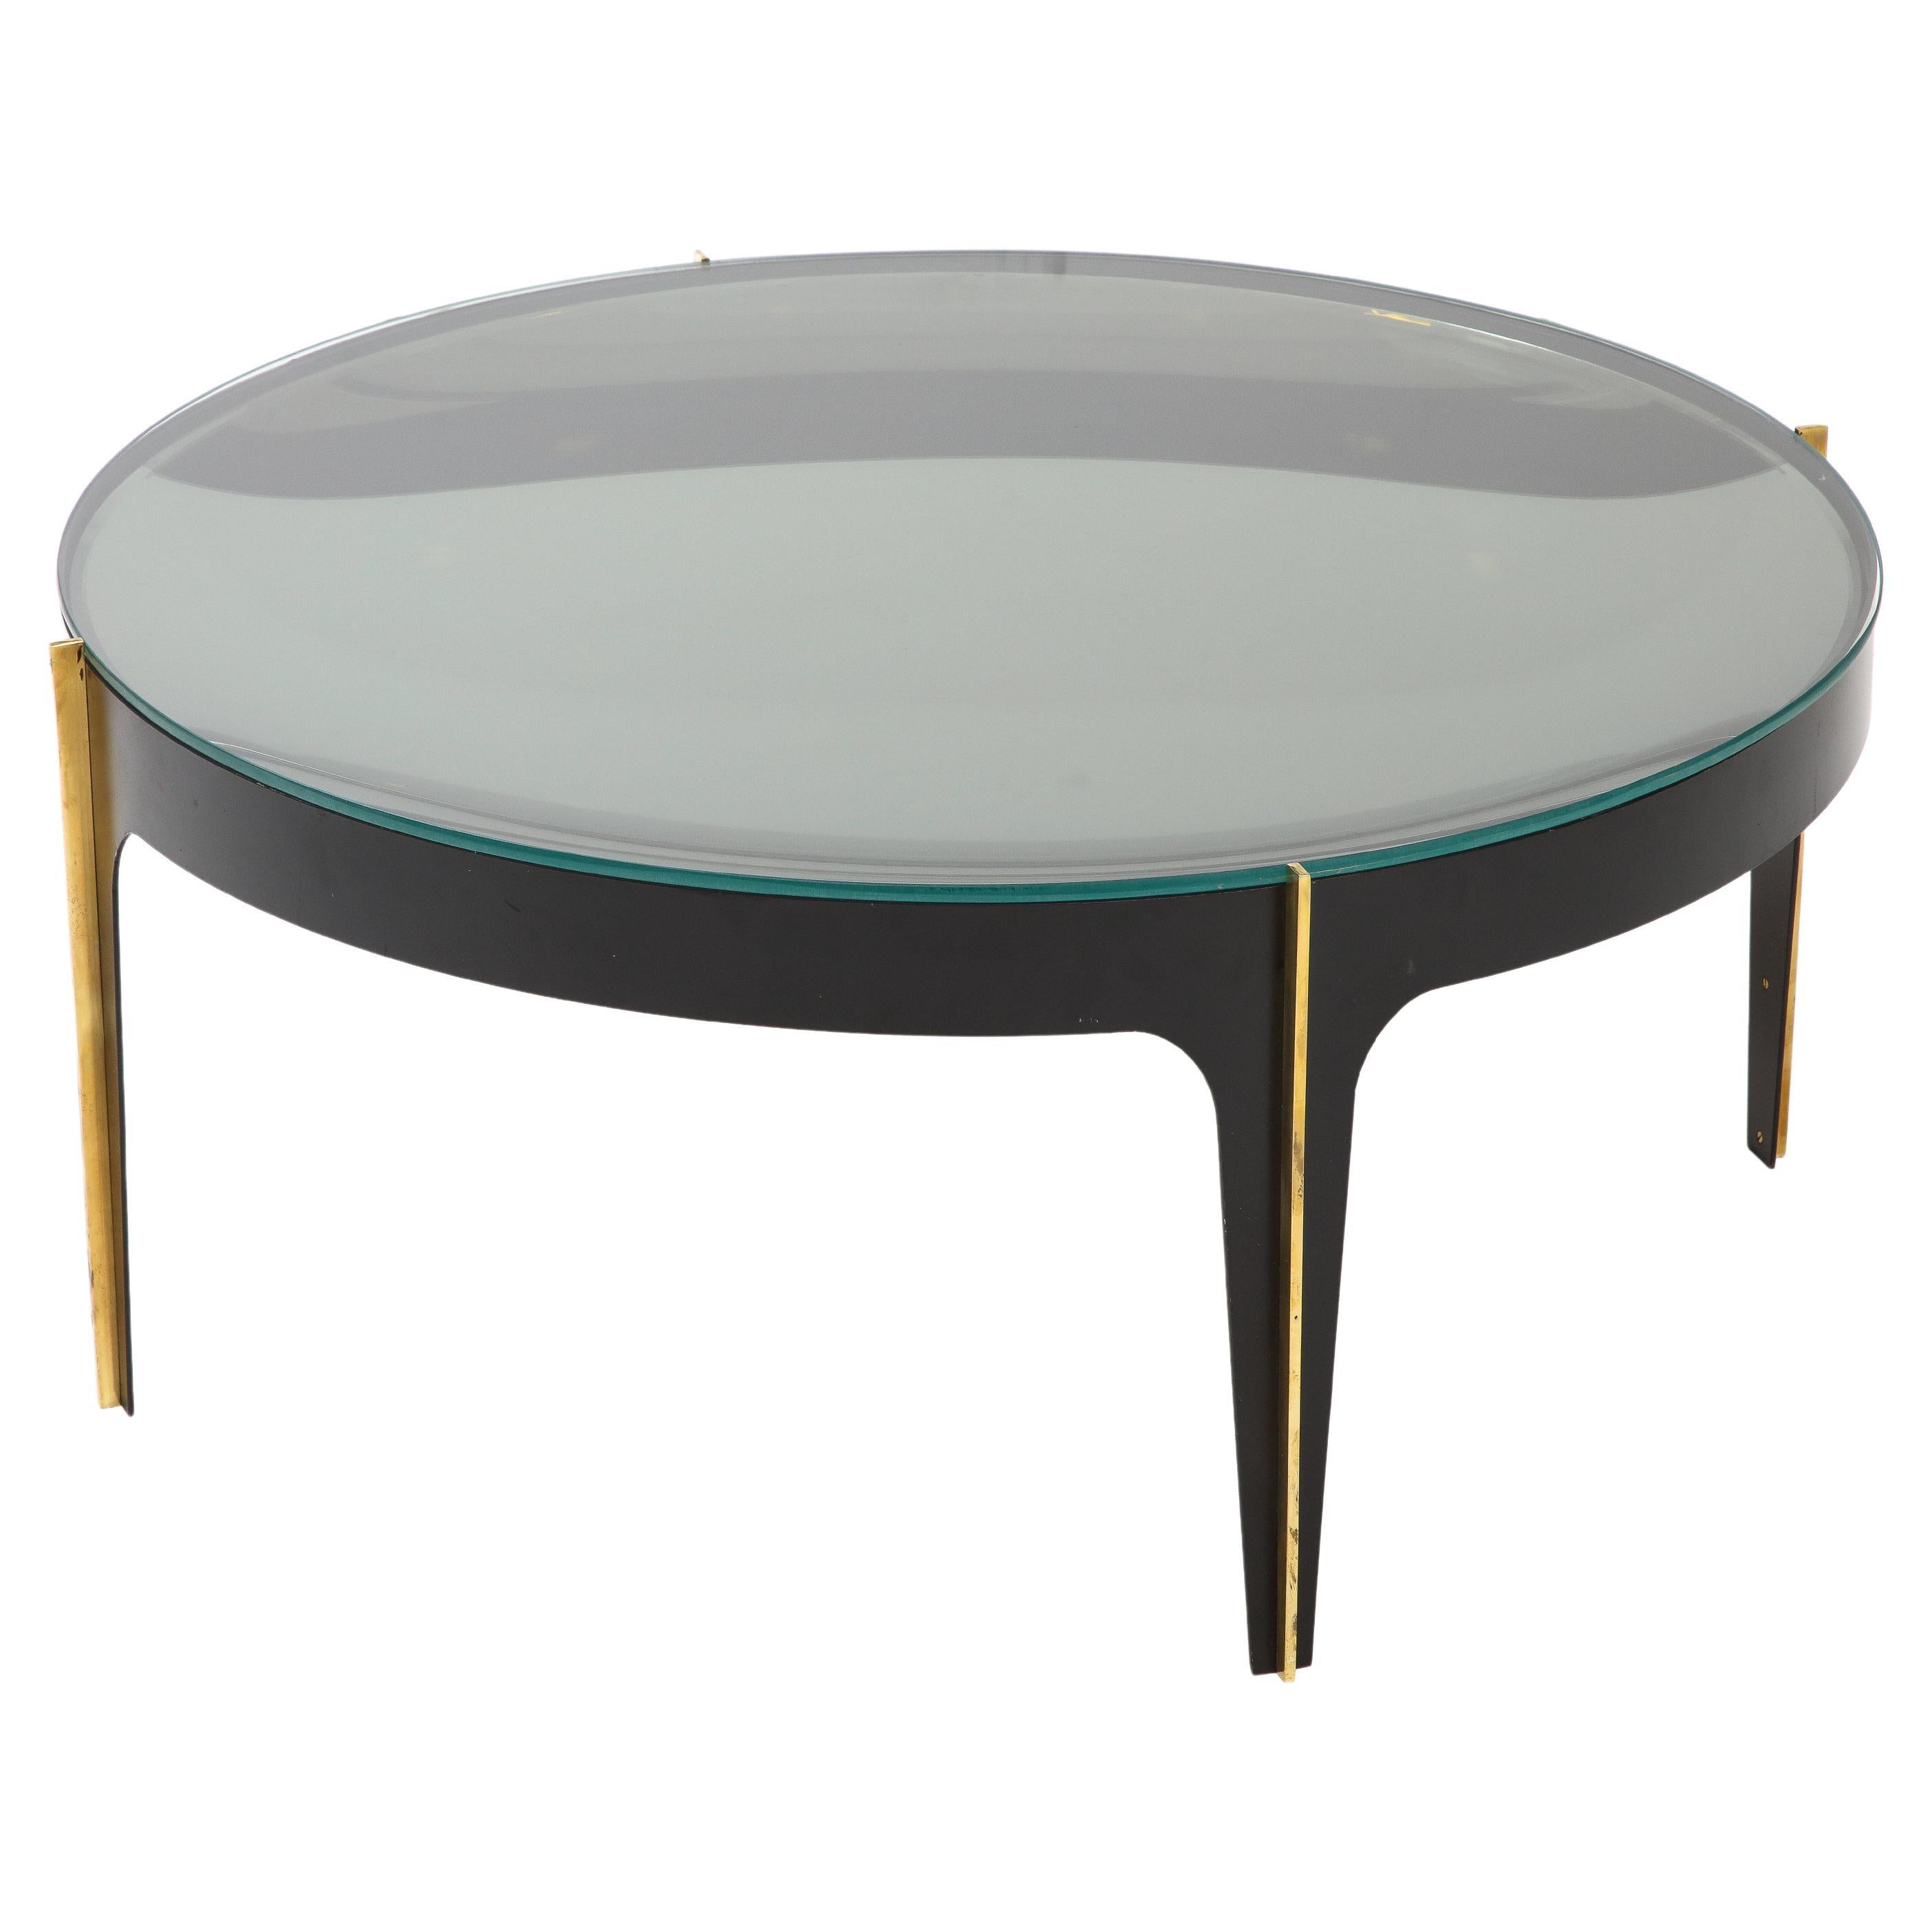 Round Cocktail Table in Black Enameled Metal, Brass and Green Grey Optical Glass For Sale